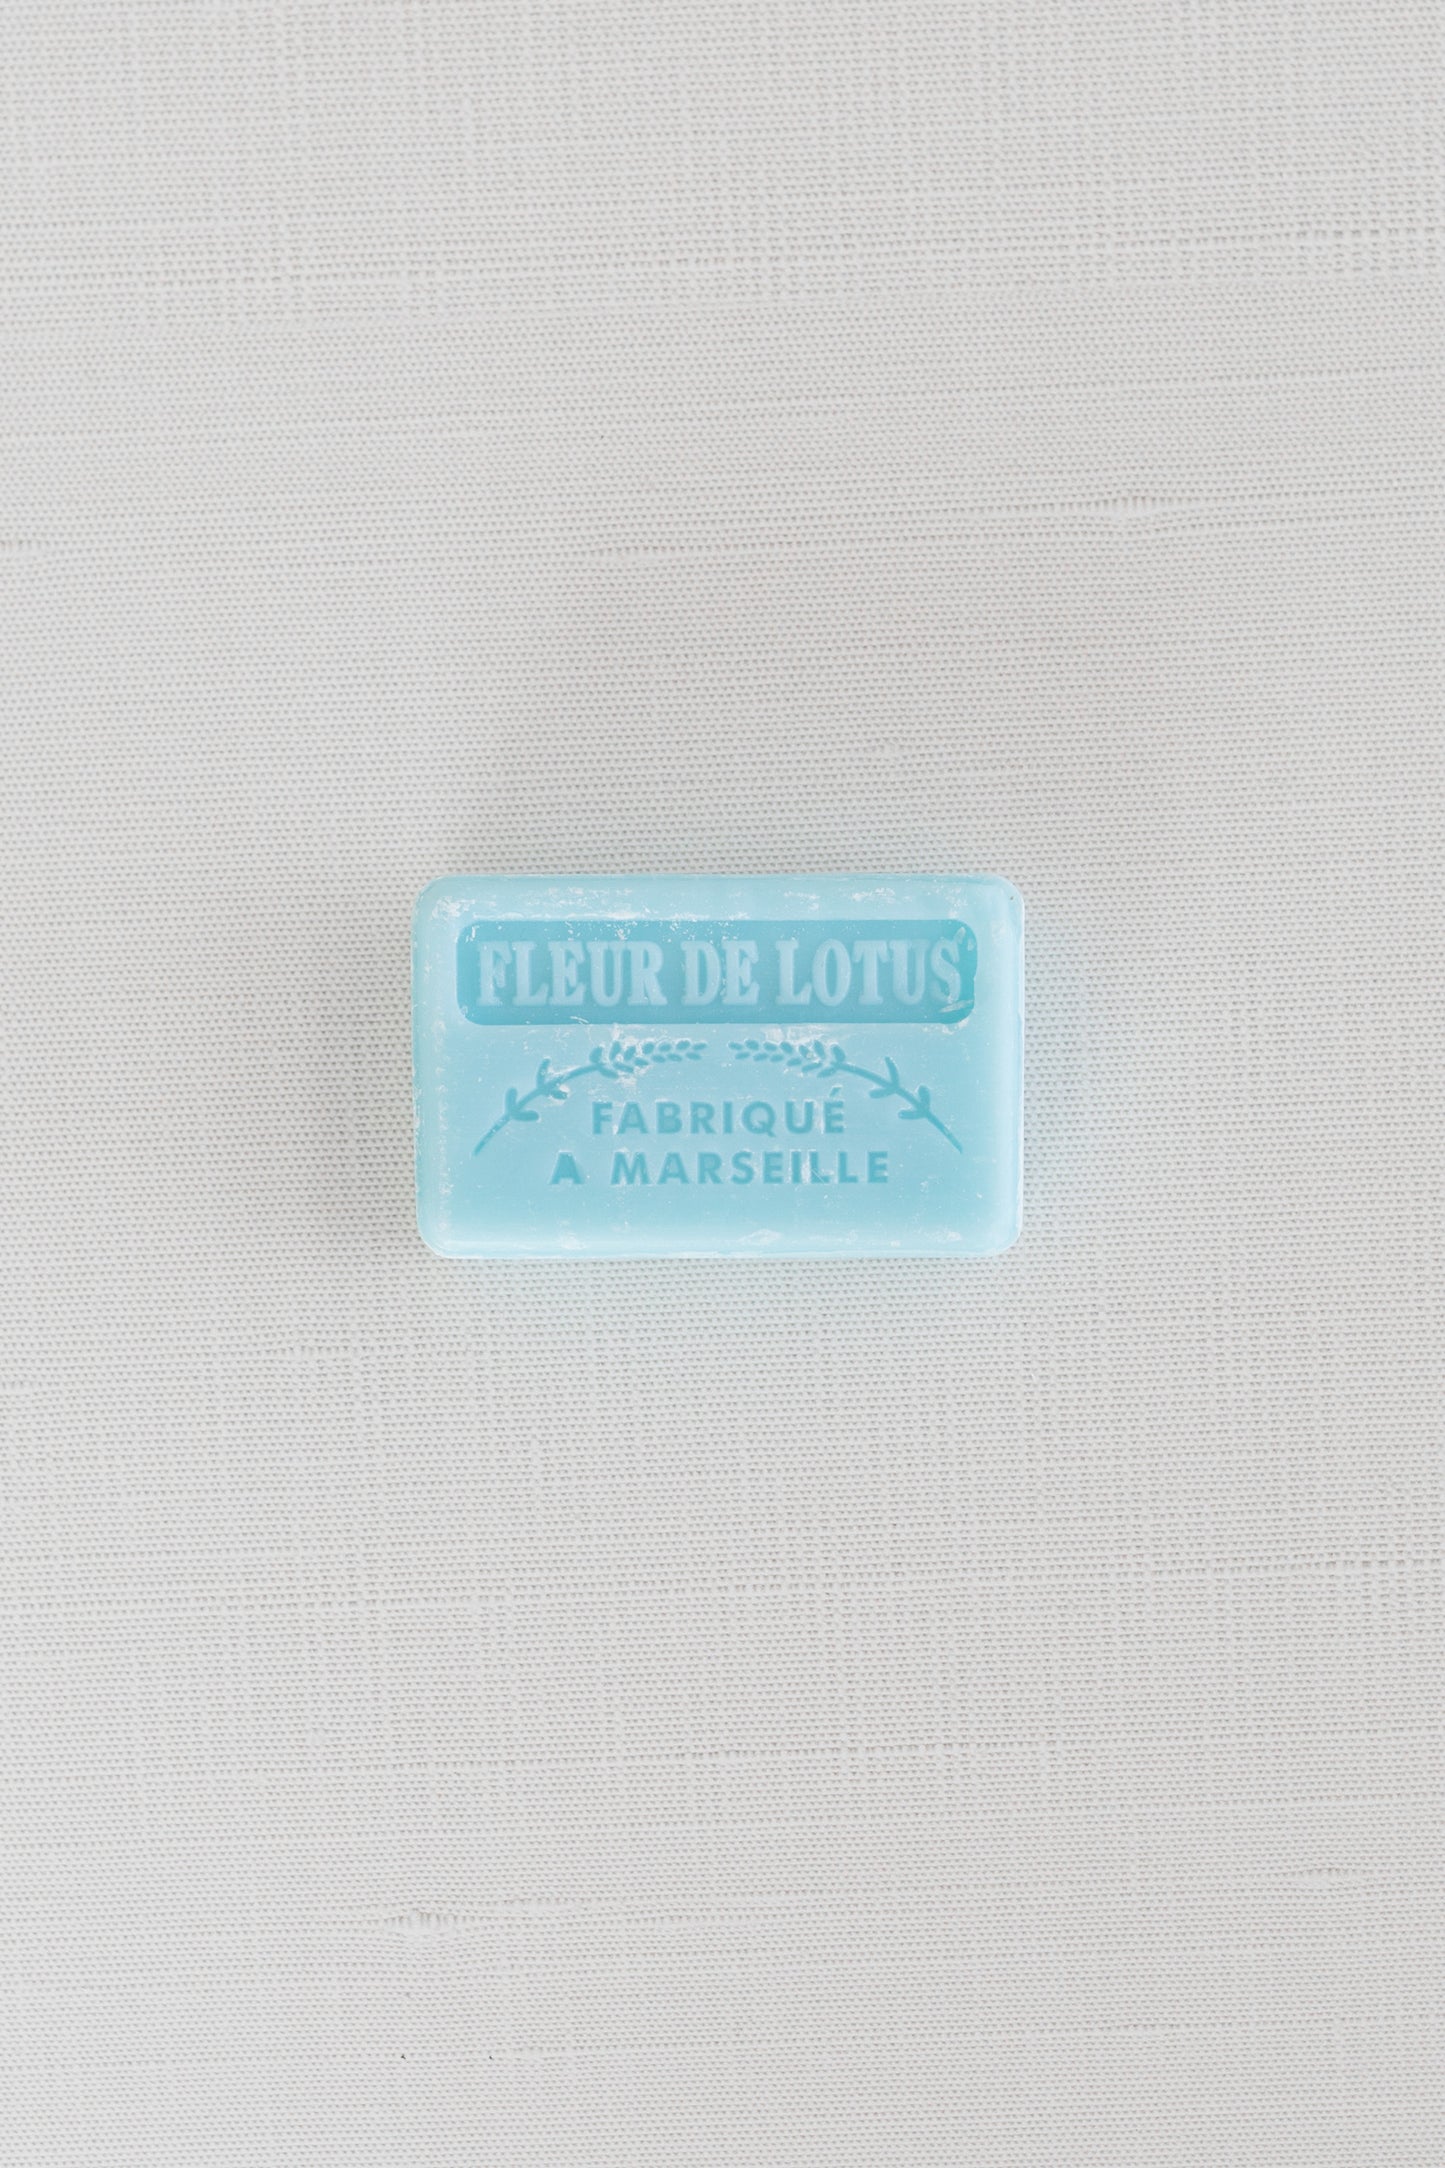 Small Lotus Blossom French Soap